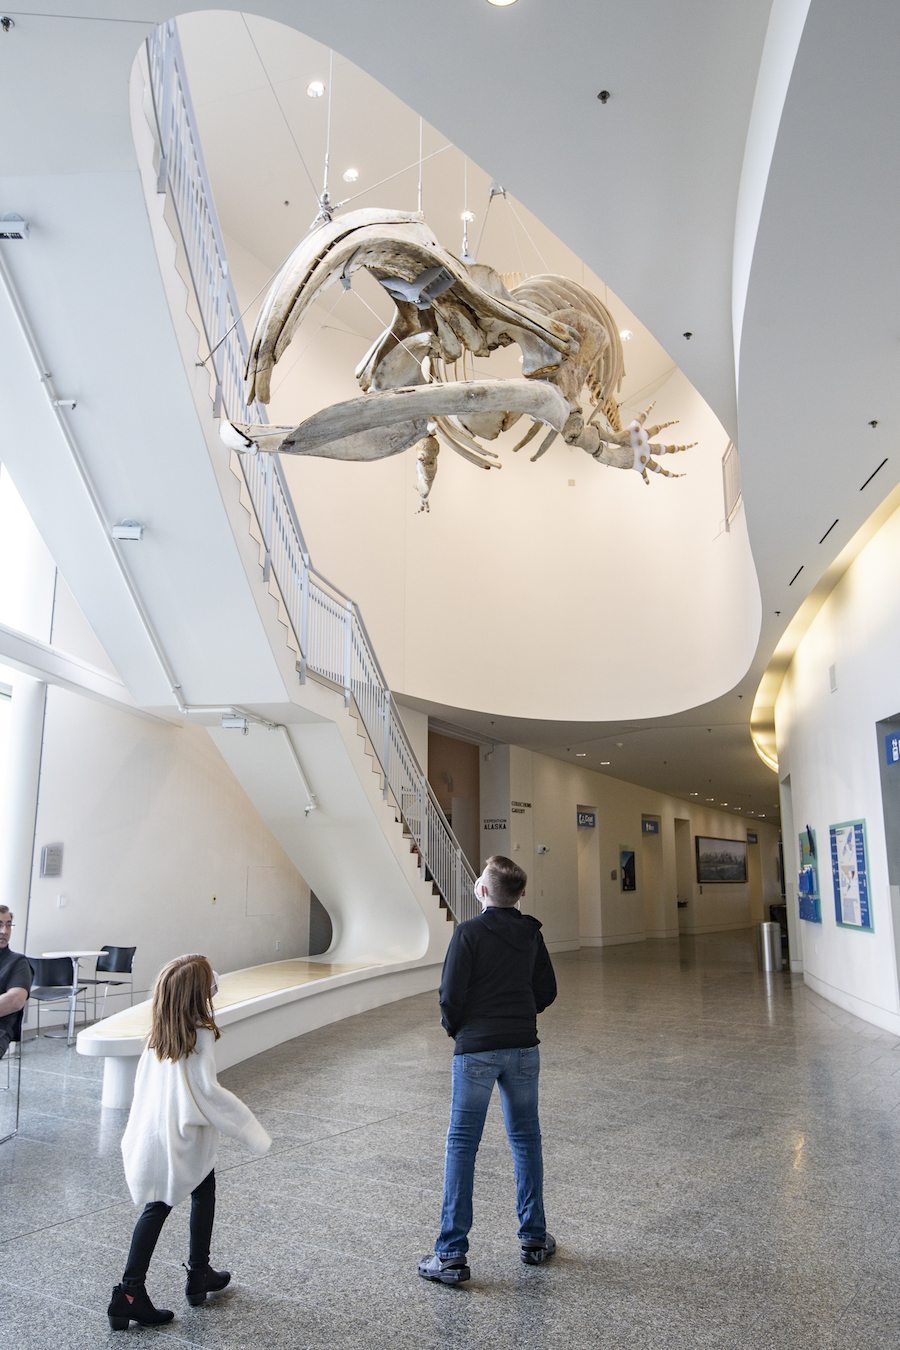 Two people look up at a suspended bowhead whale skeleton.